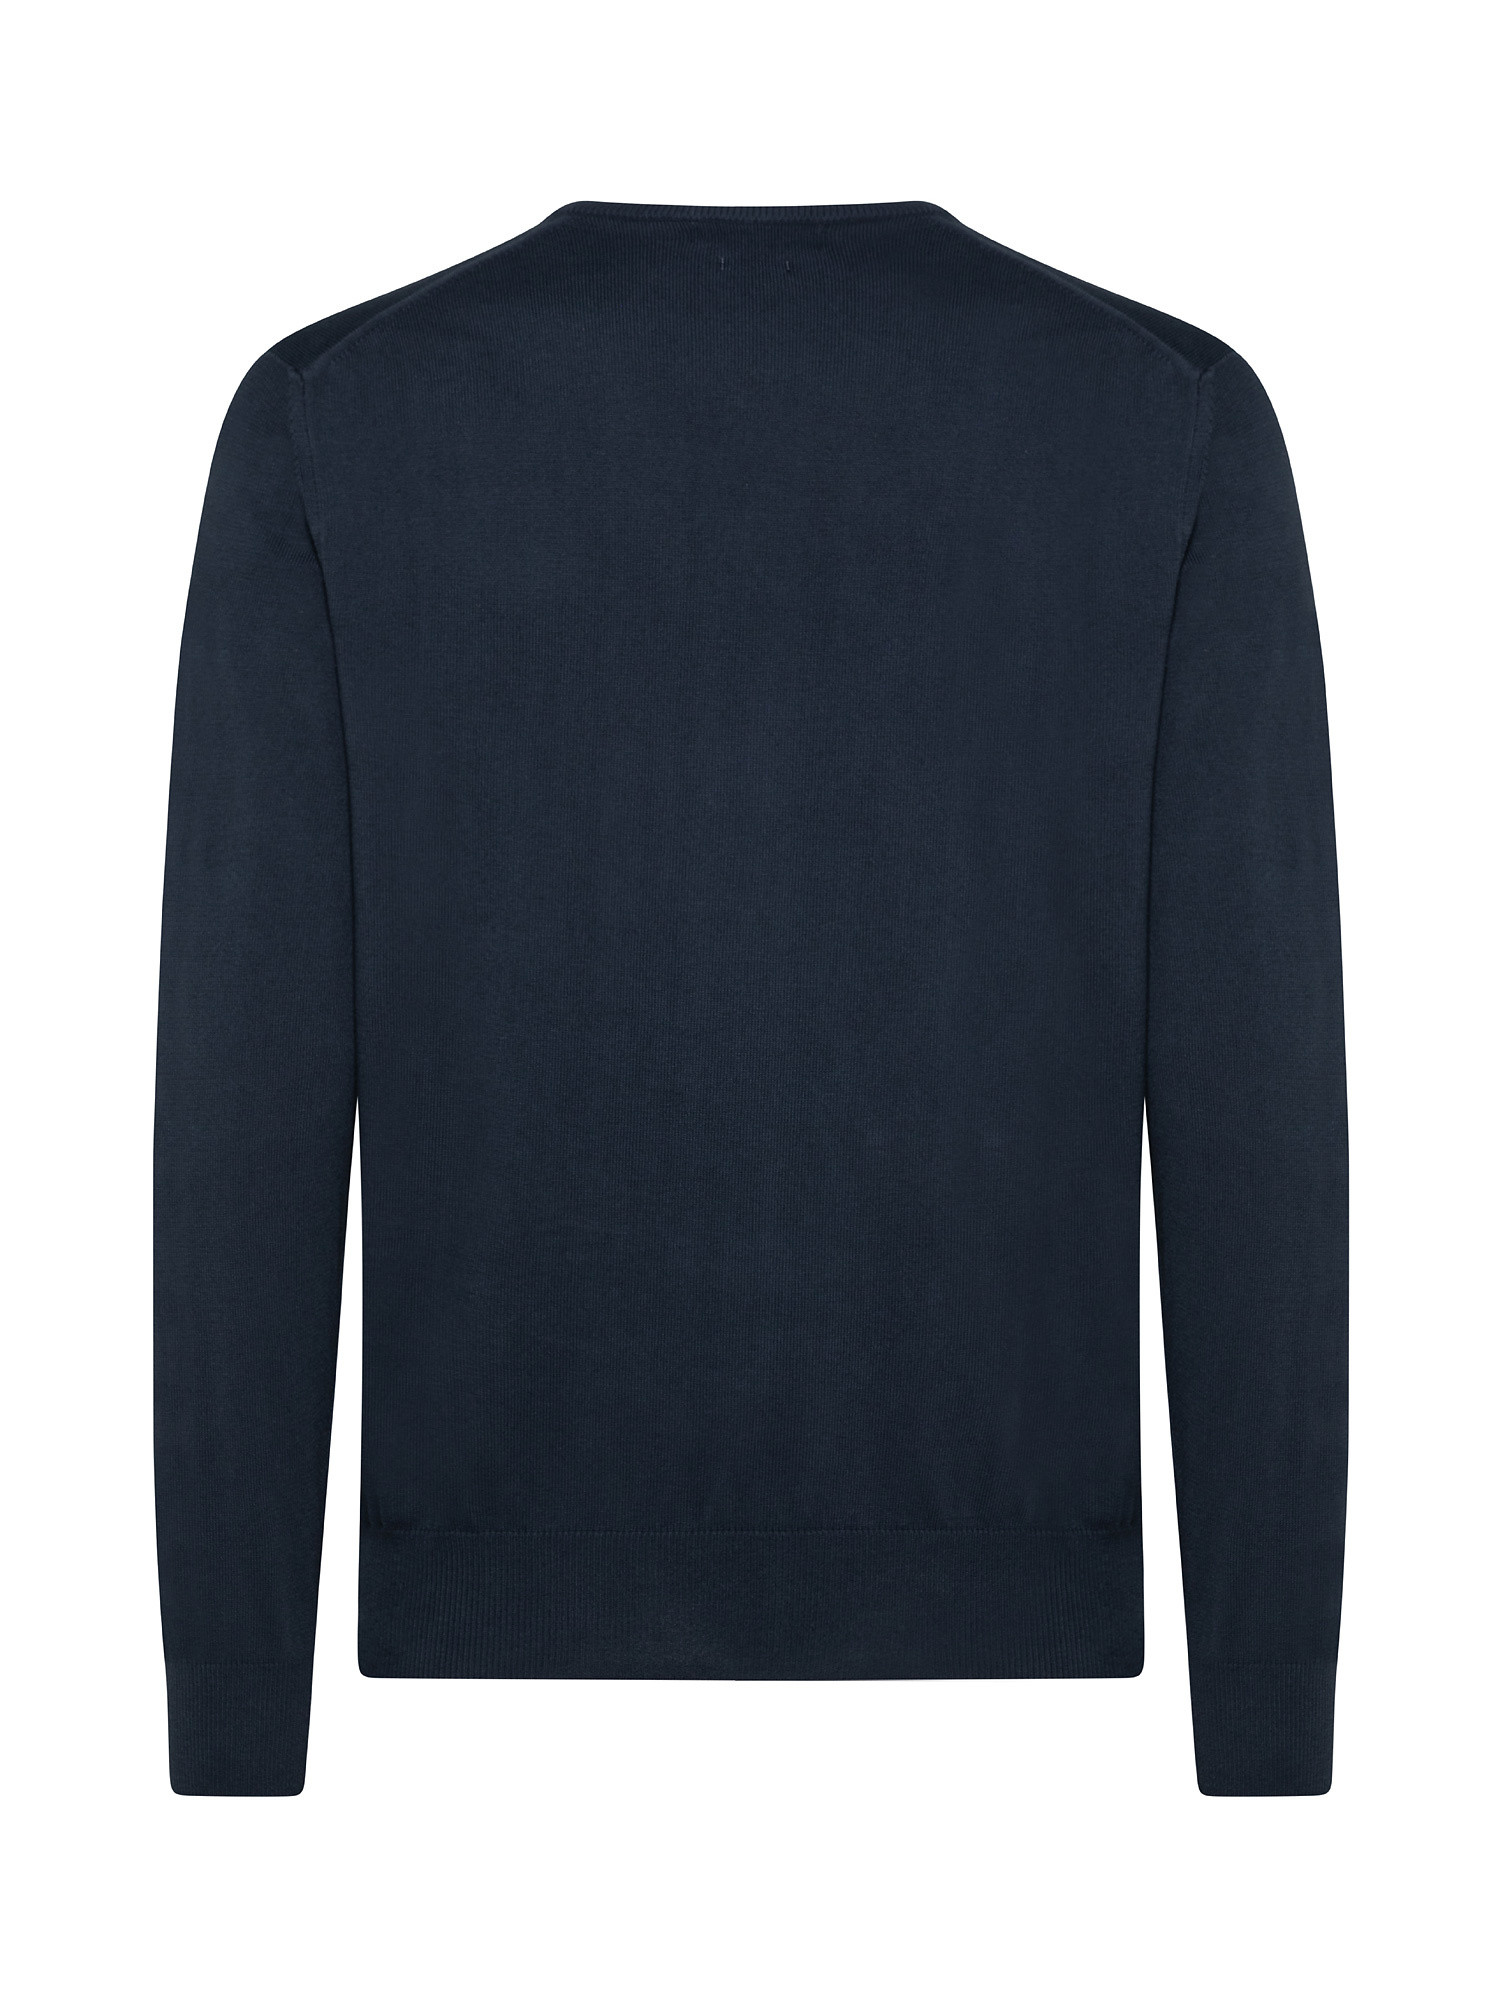 V-neck sweater in pure cotton, Dark Blue, large image number 1